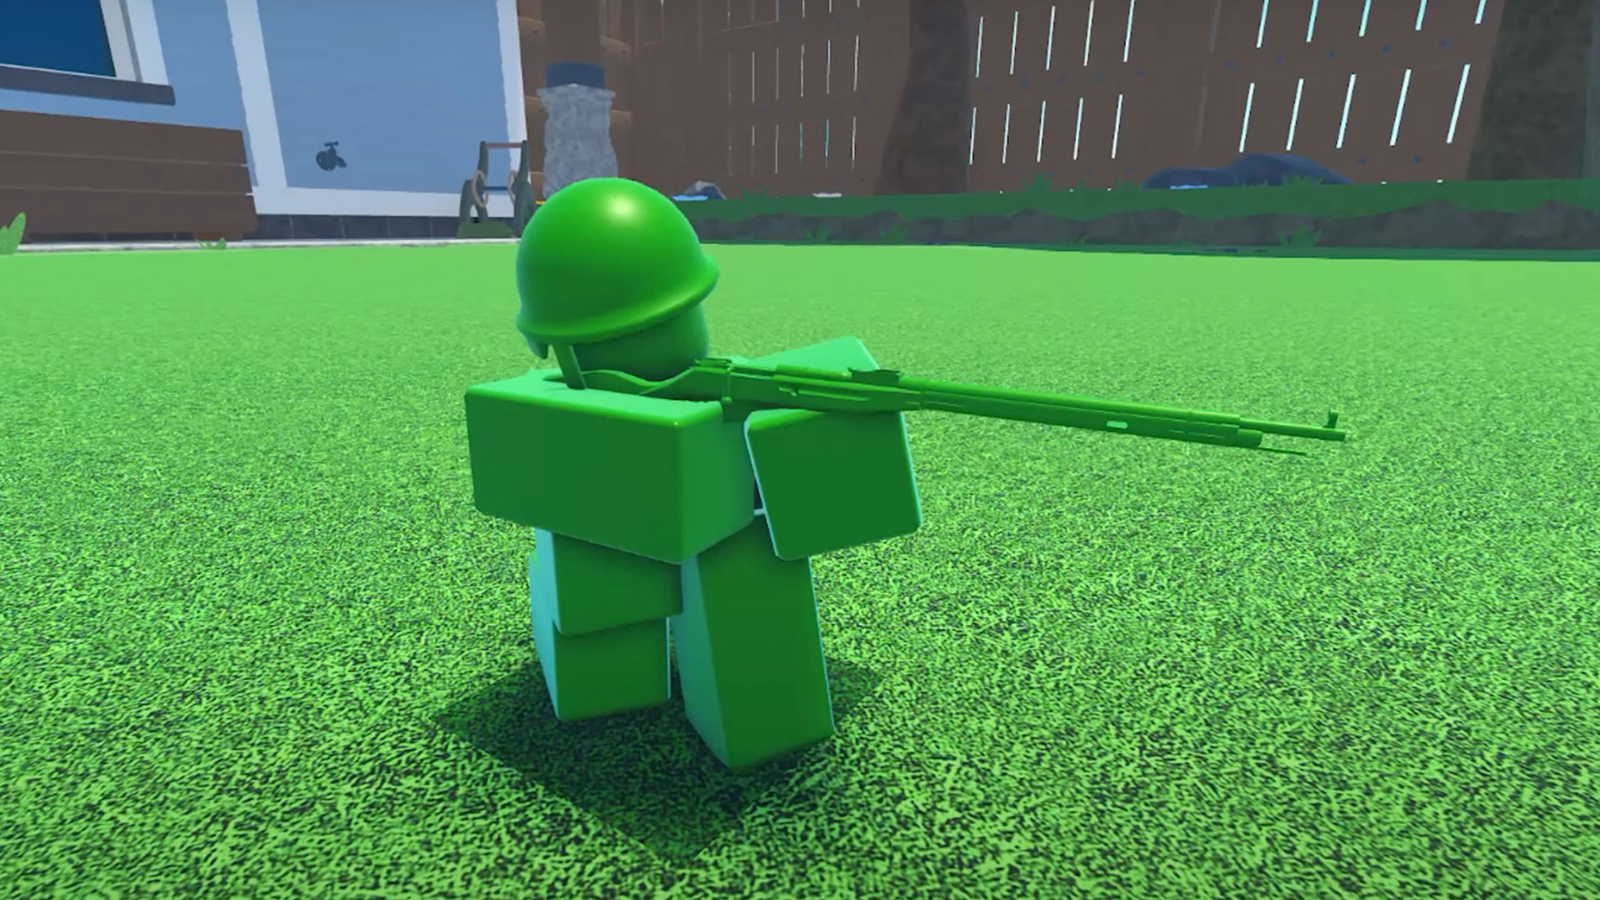 Code Roblox All Star Tower Defense - APRIL 2023